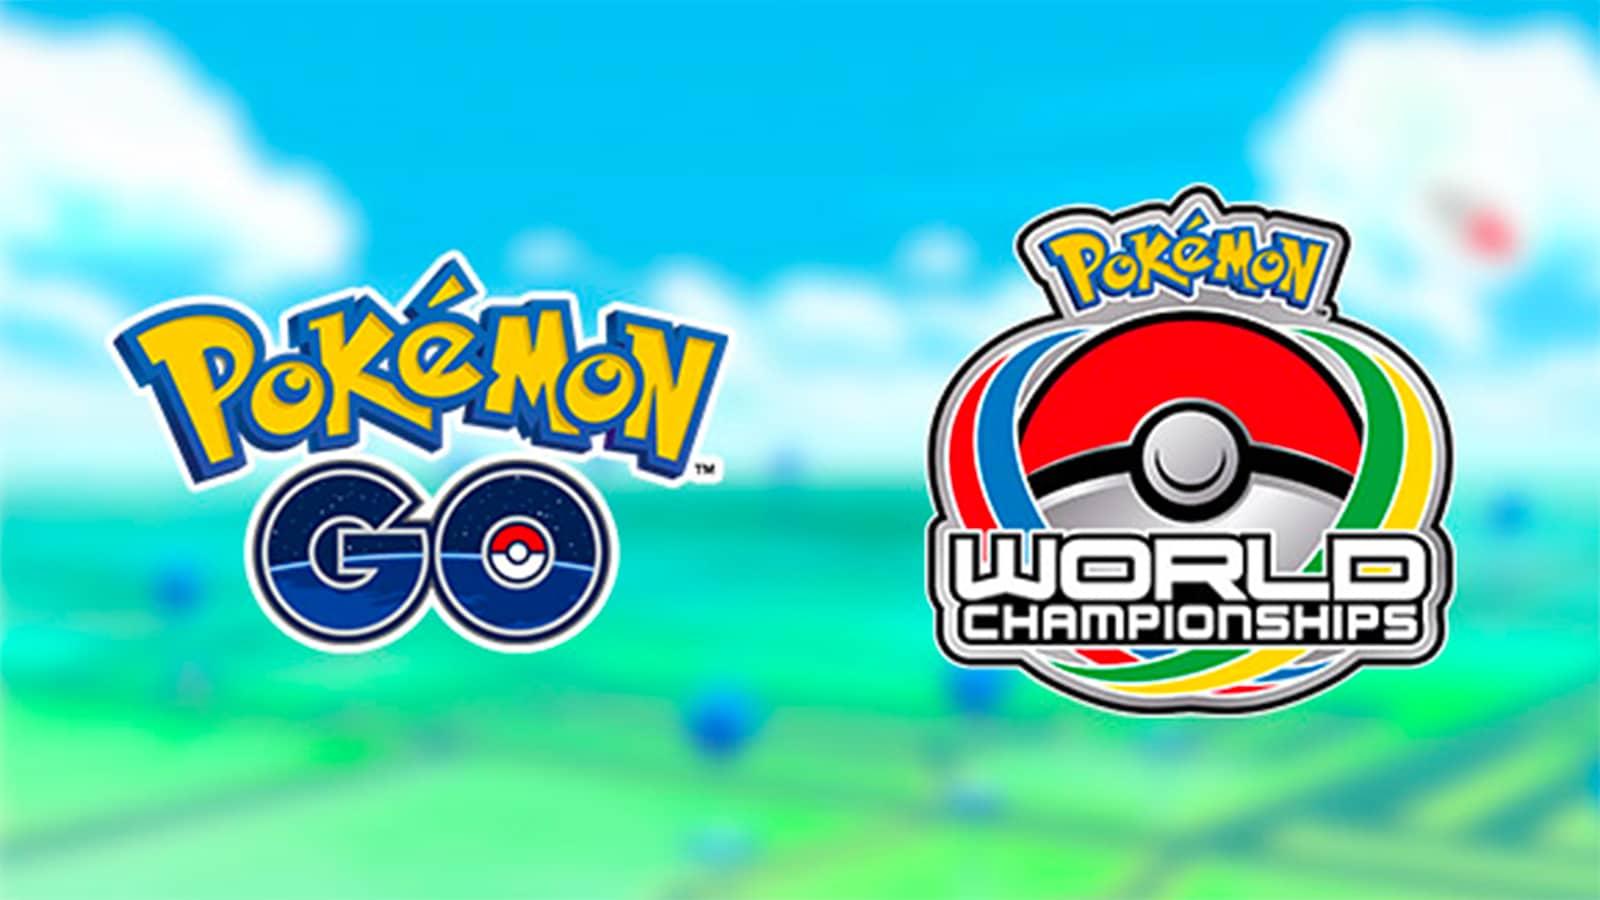 Pokemon Go World Championships Timed Research Codes - Pokemon GO Guide - IGN